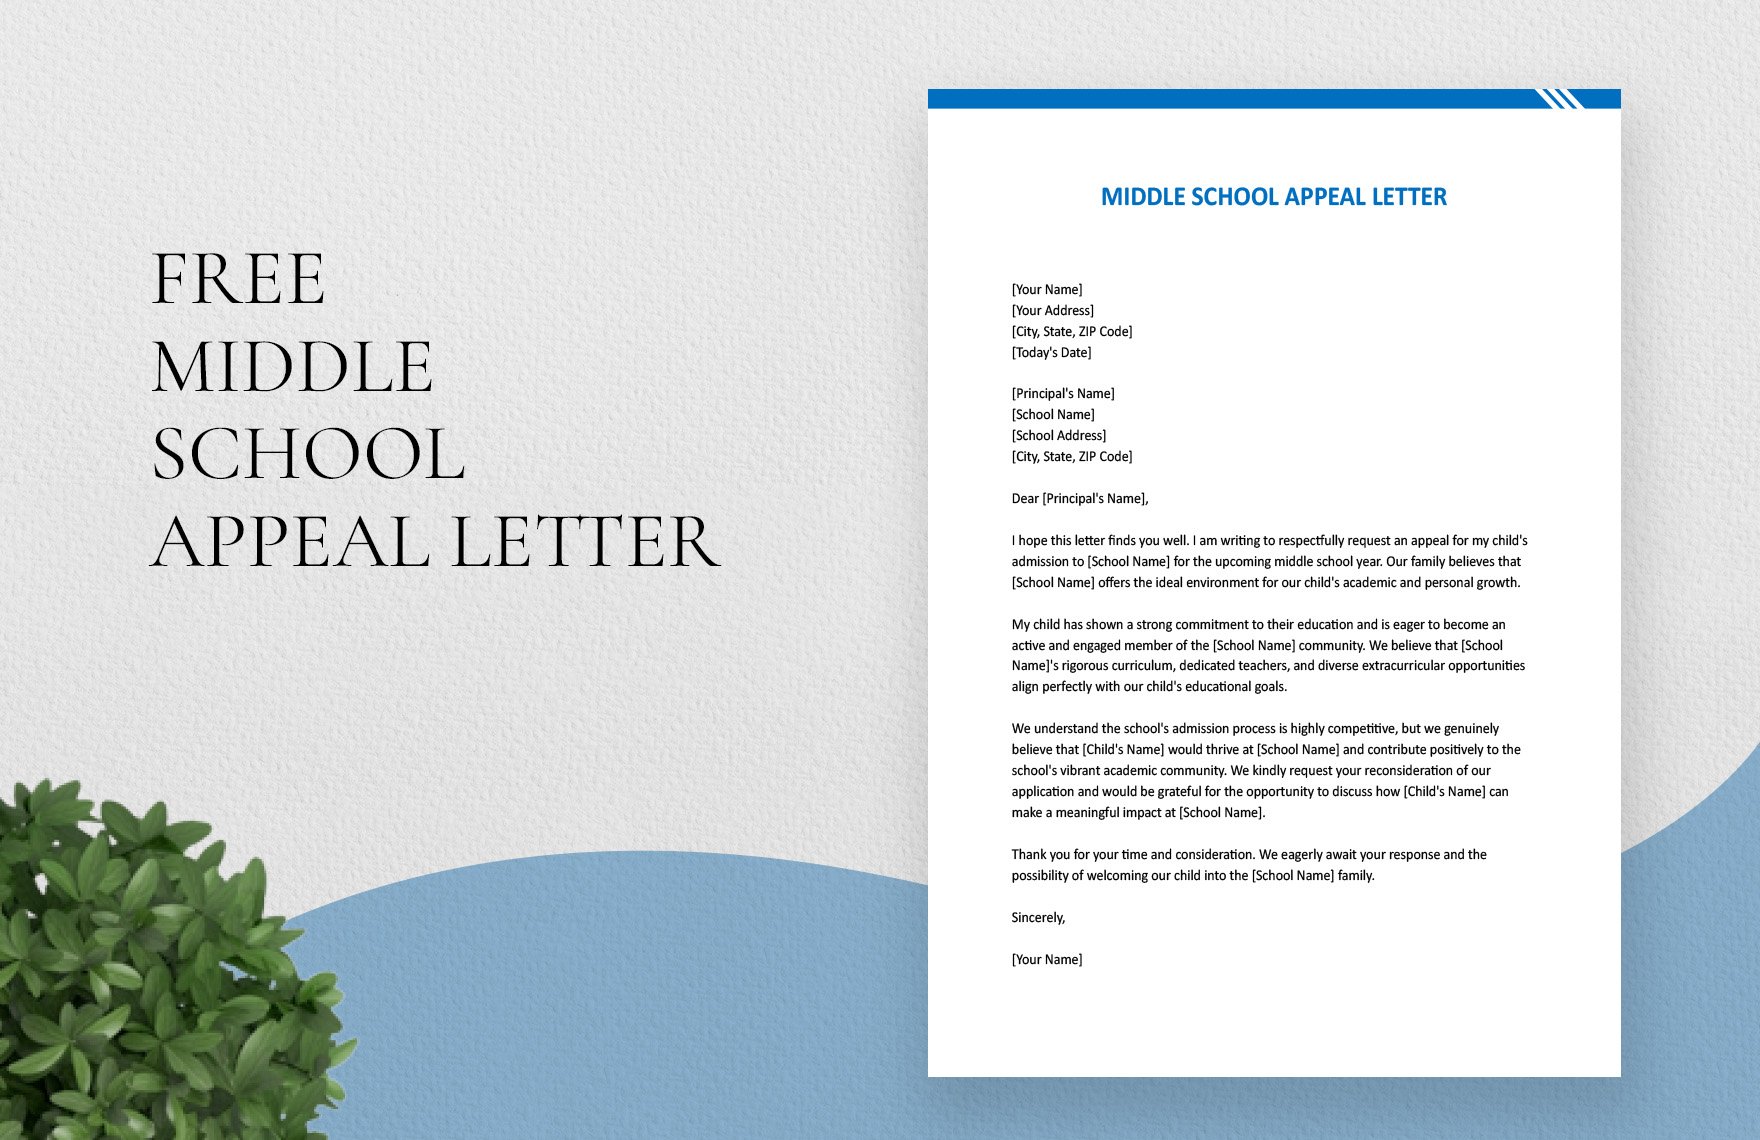 Middle School Appeal Letter in Word, Google Docs